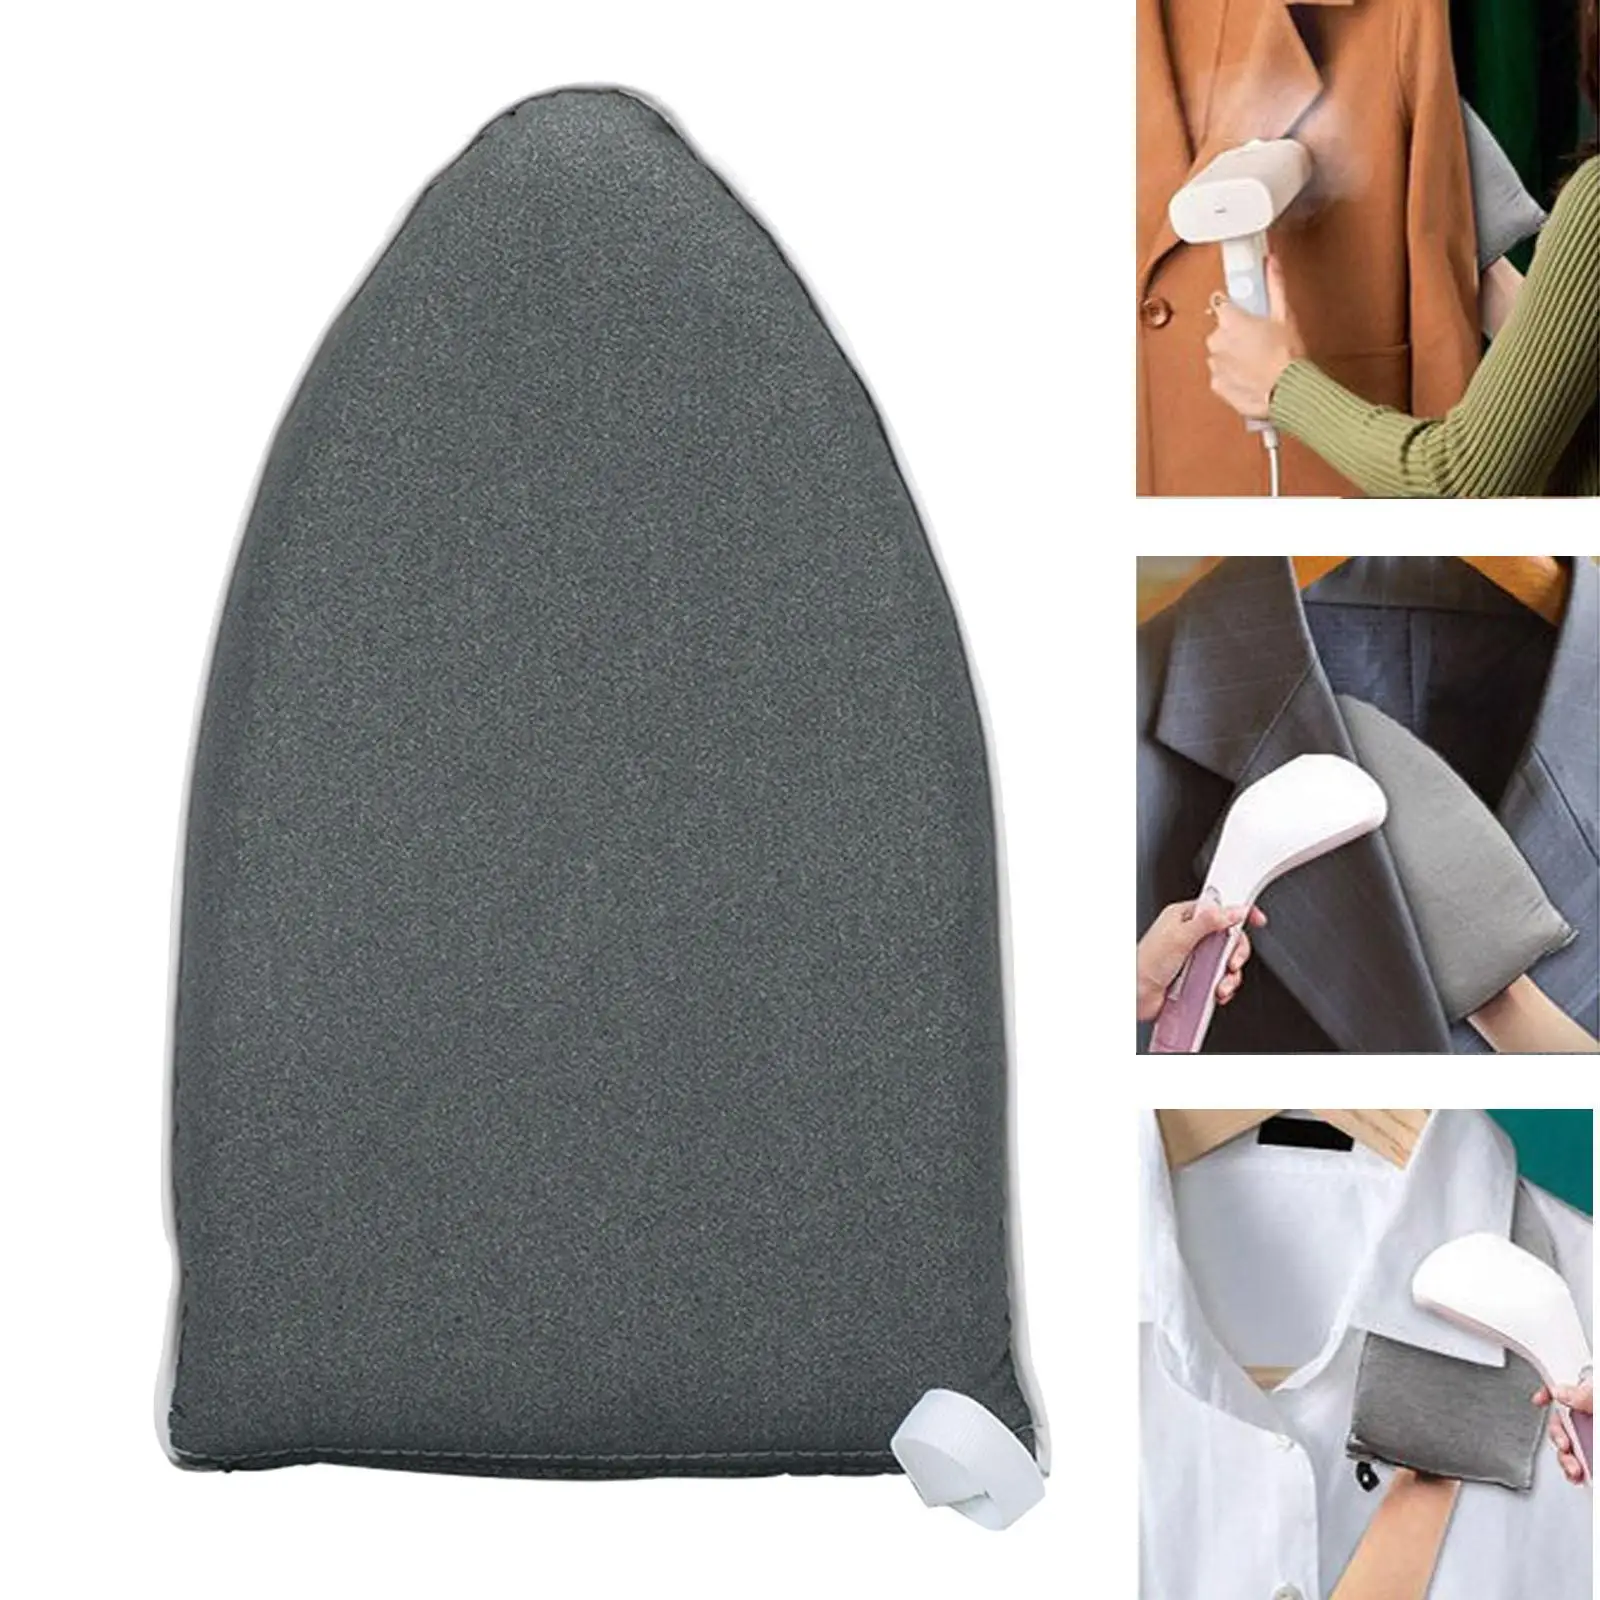 Portable Clothes Garment Steamer Gloves Ironing Board Holder Thick Sponge Heat Insulation Iron Table Rack Ironing Clothes Gloves